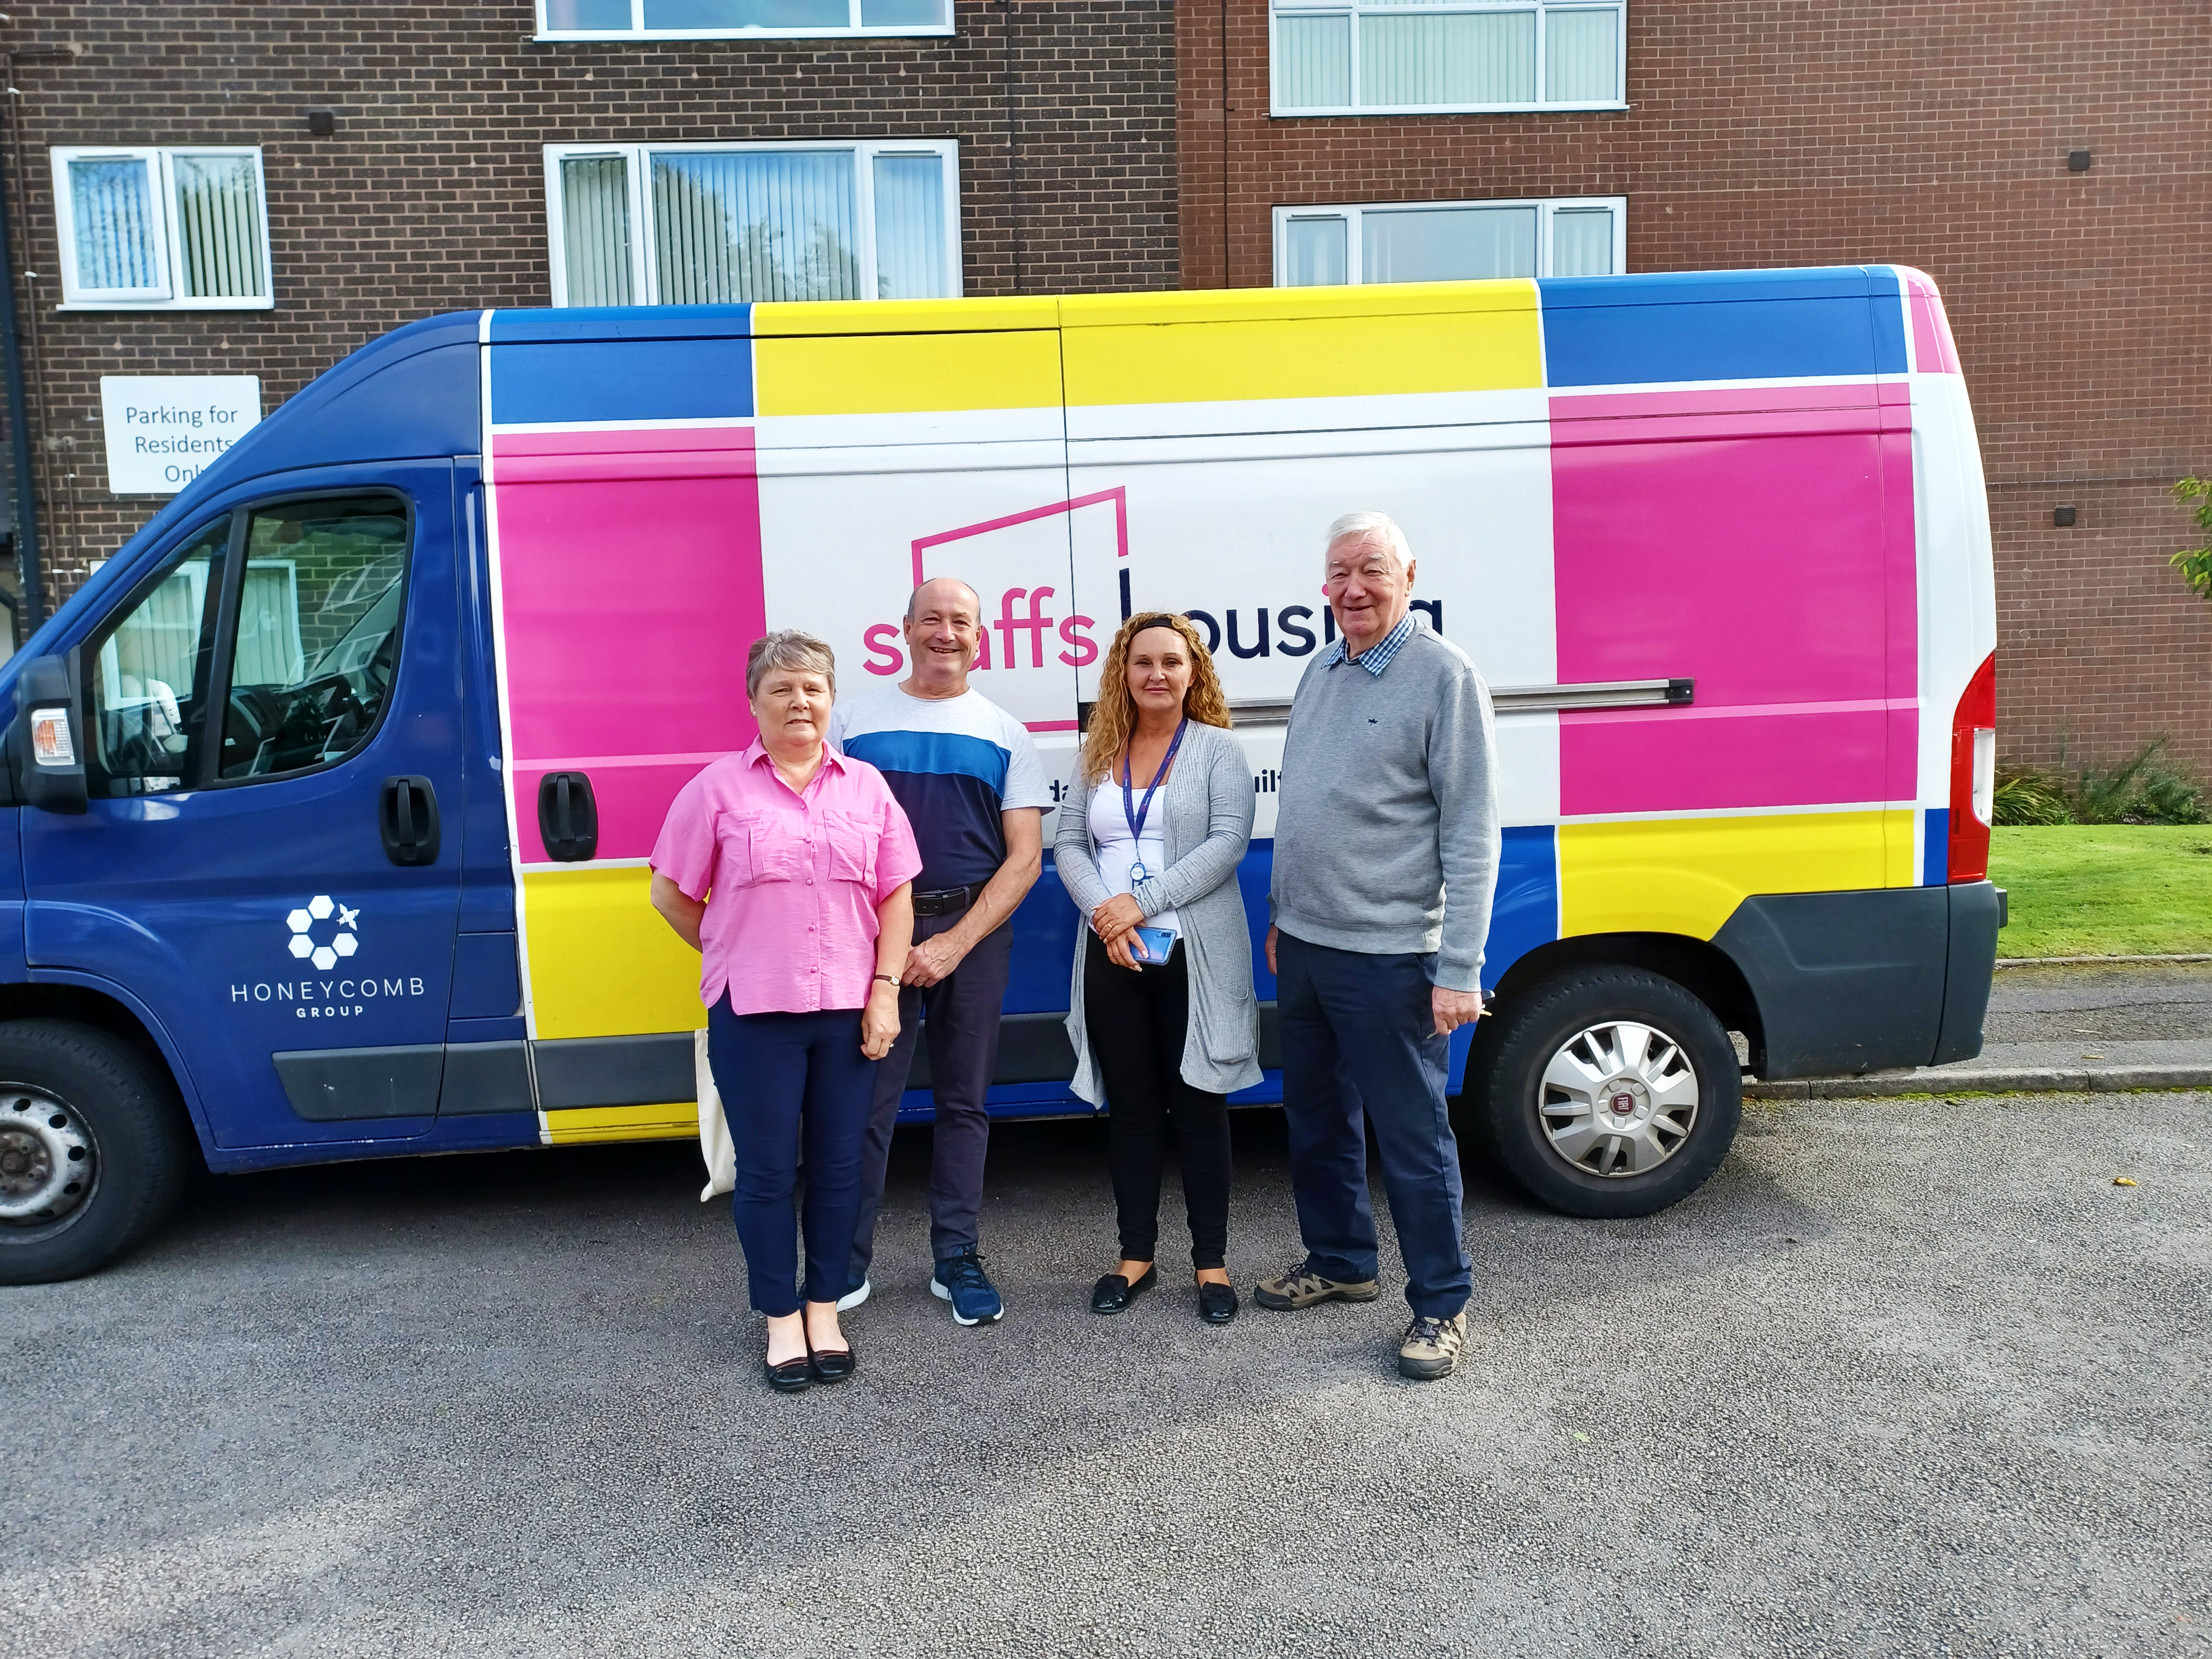 Housing officer and residents standing in front of a Staffs Housing branded van at a scheme.